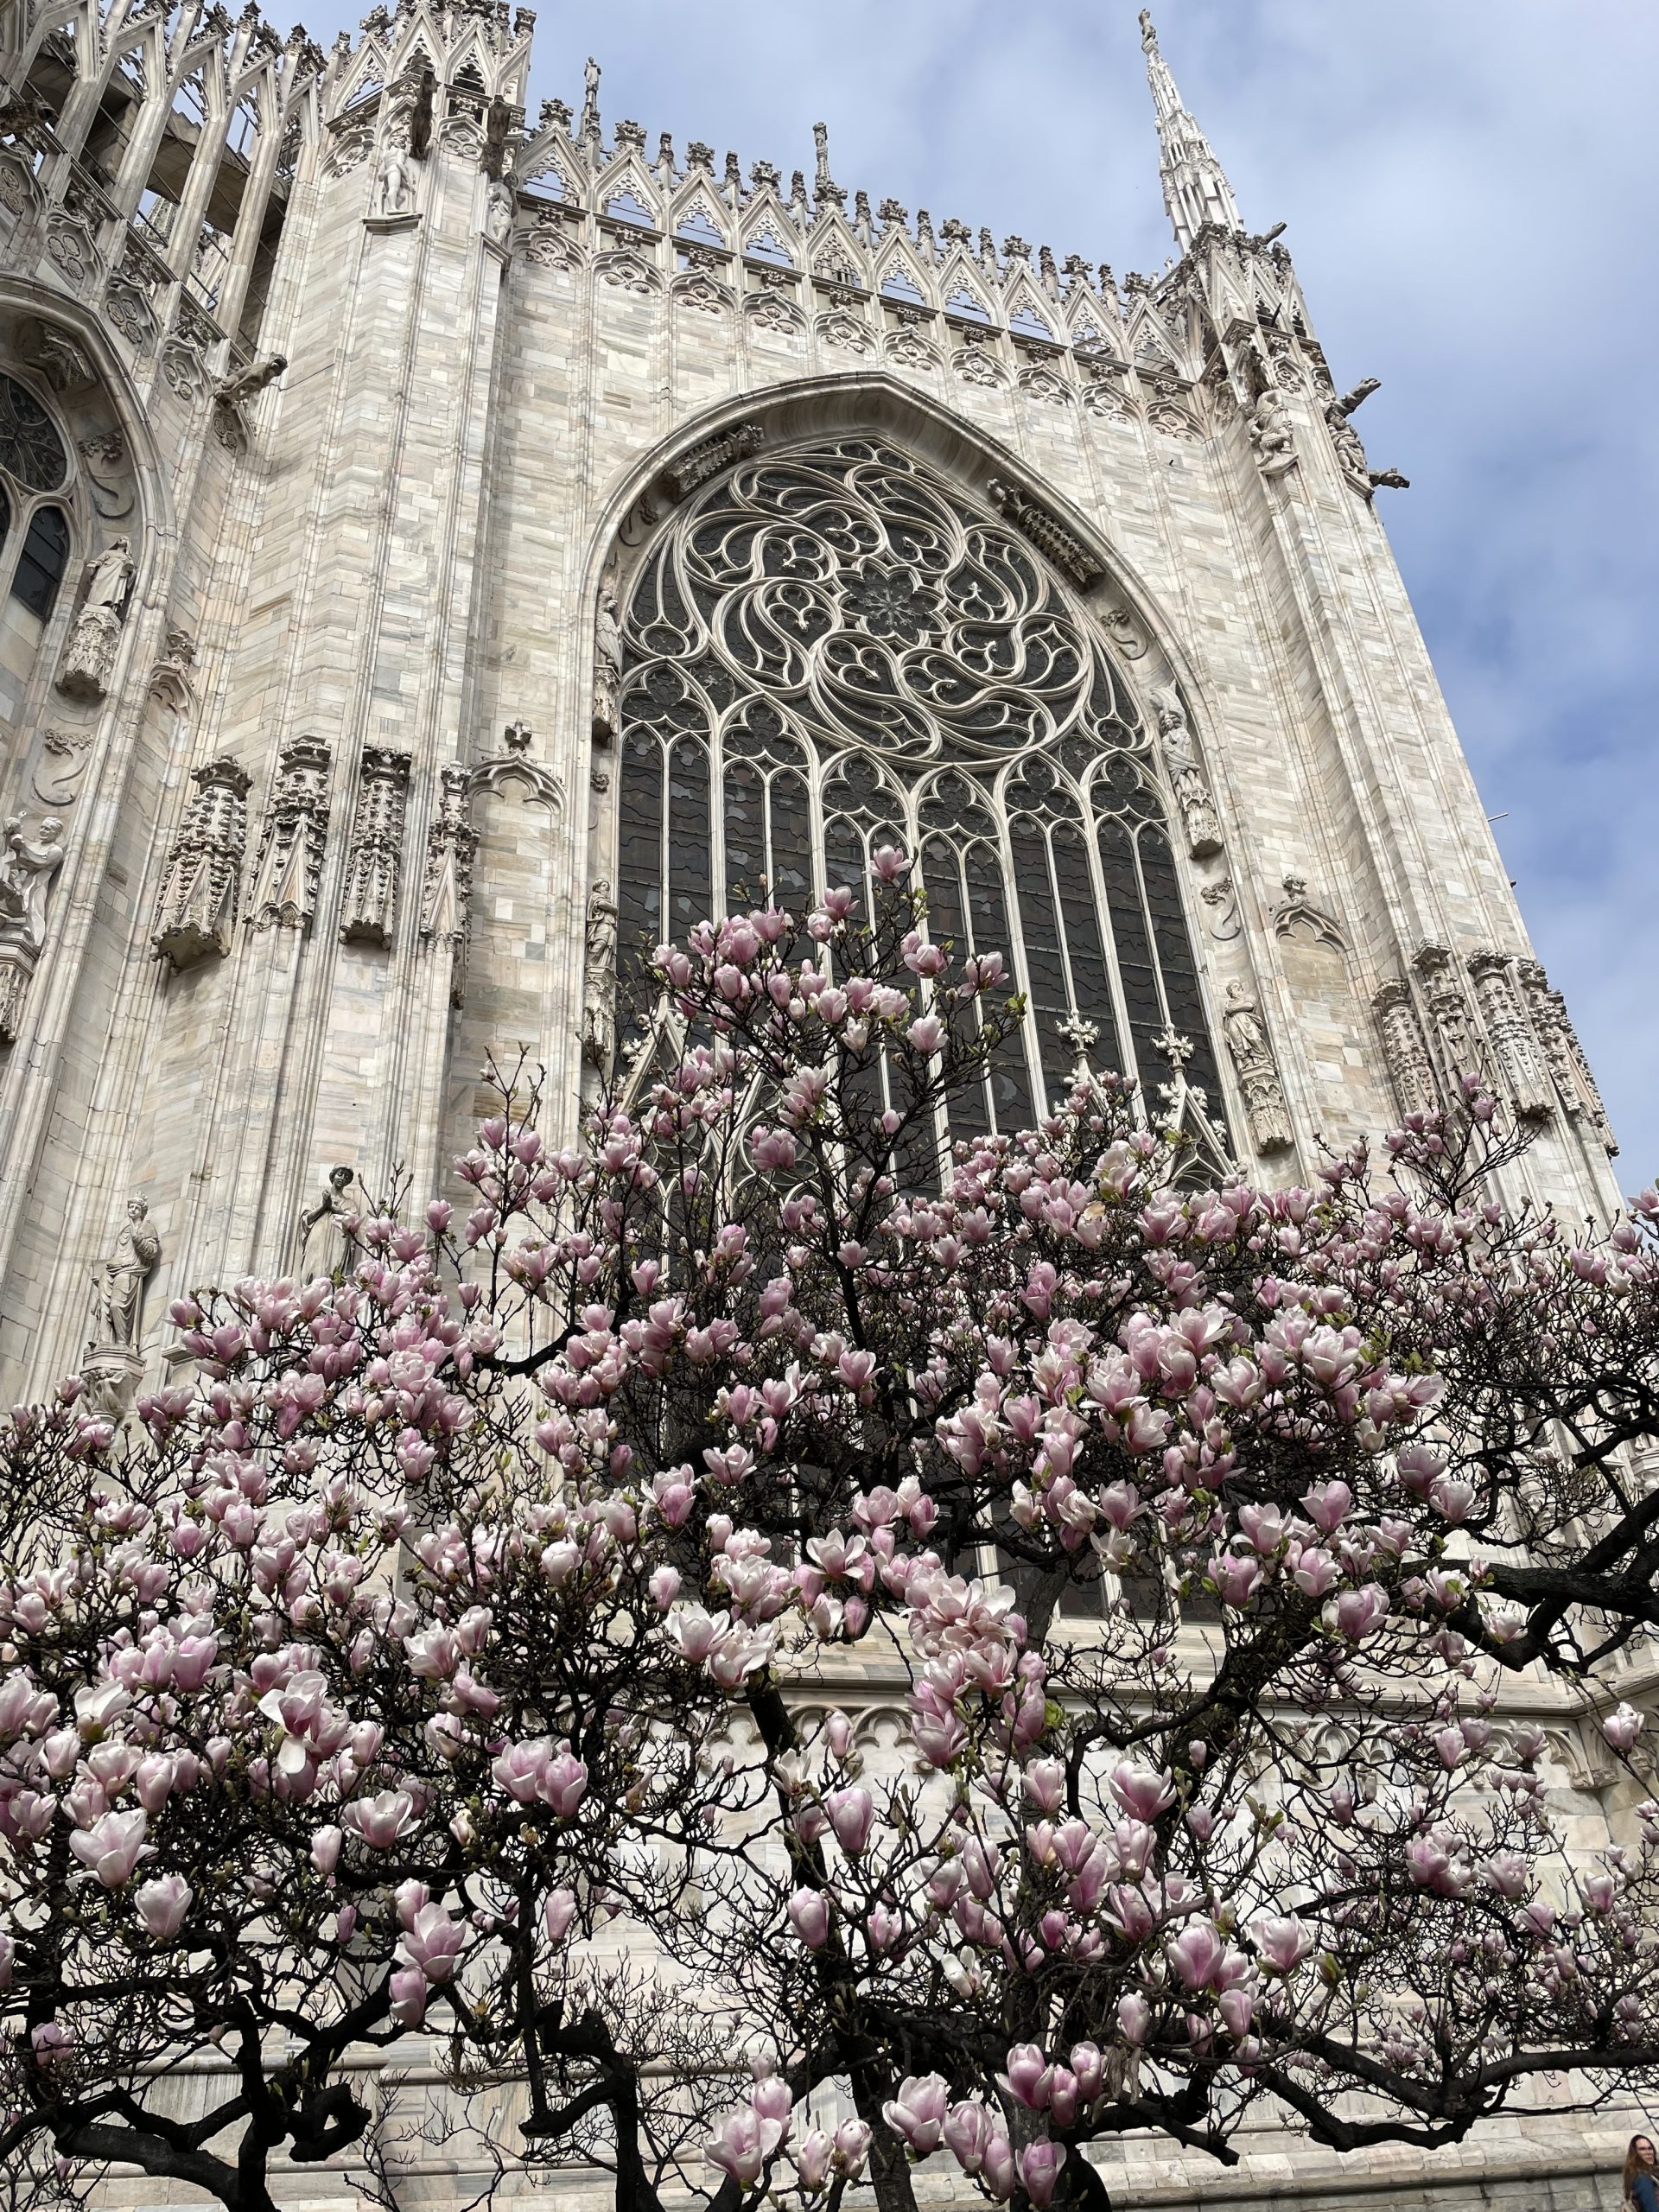 view of Duomo of Milano with cherry blossoms in February